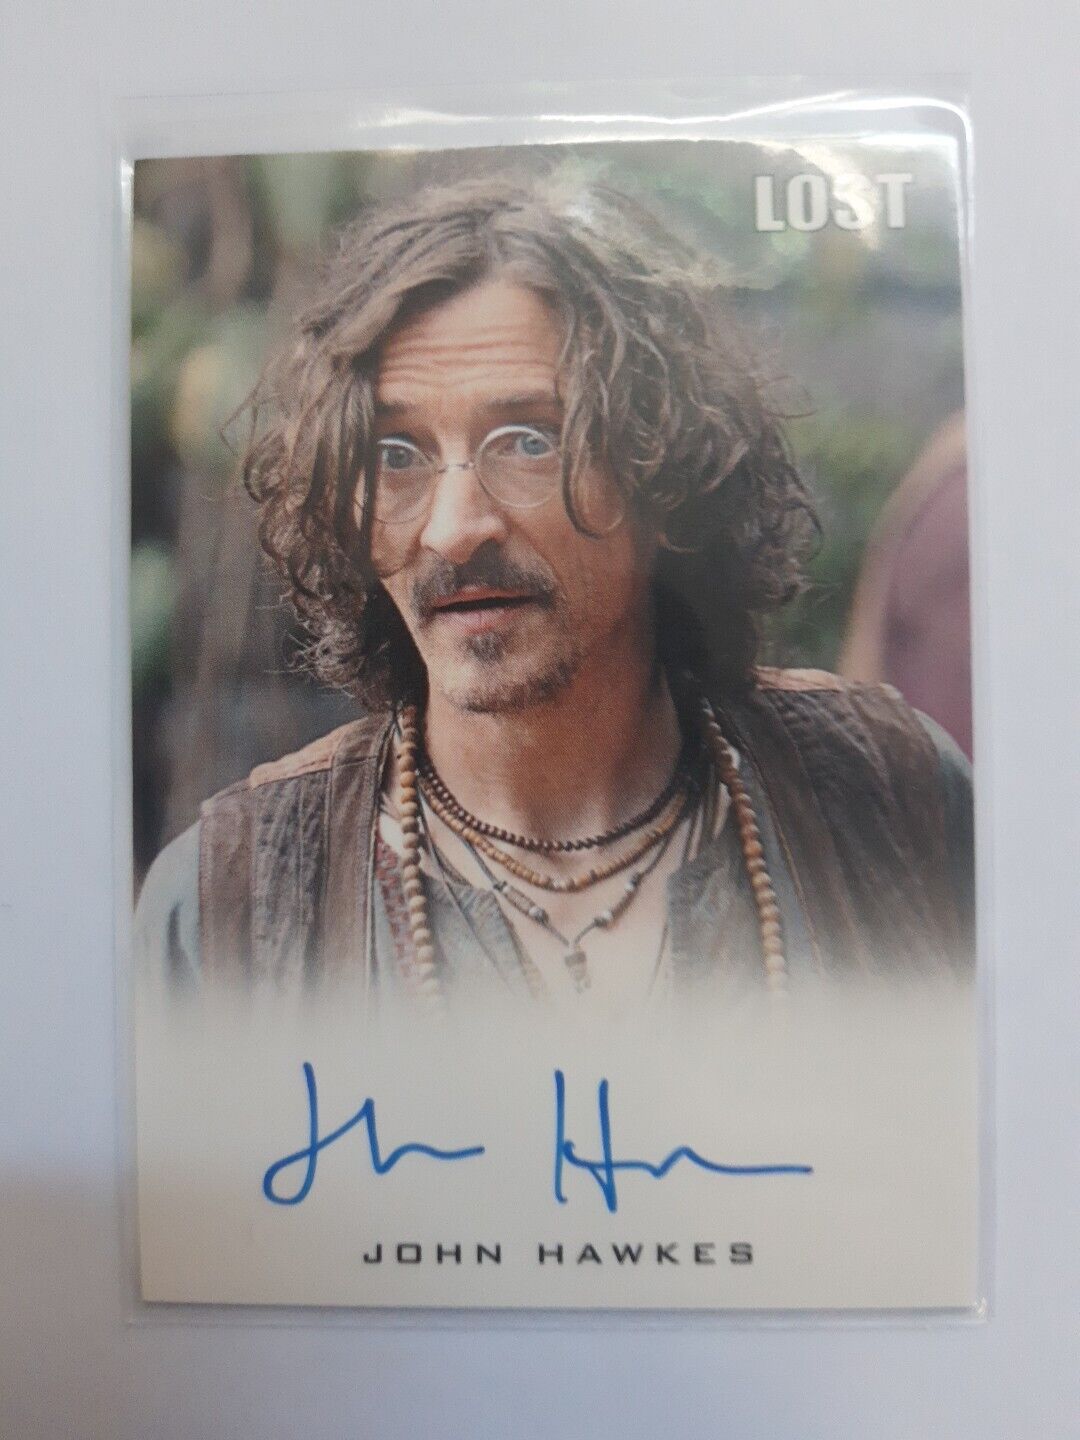 Lost Relics 2011 John Hawkes as Lennon Autograph Card. Mint Condition.